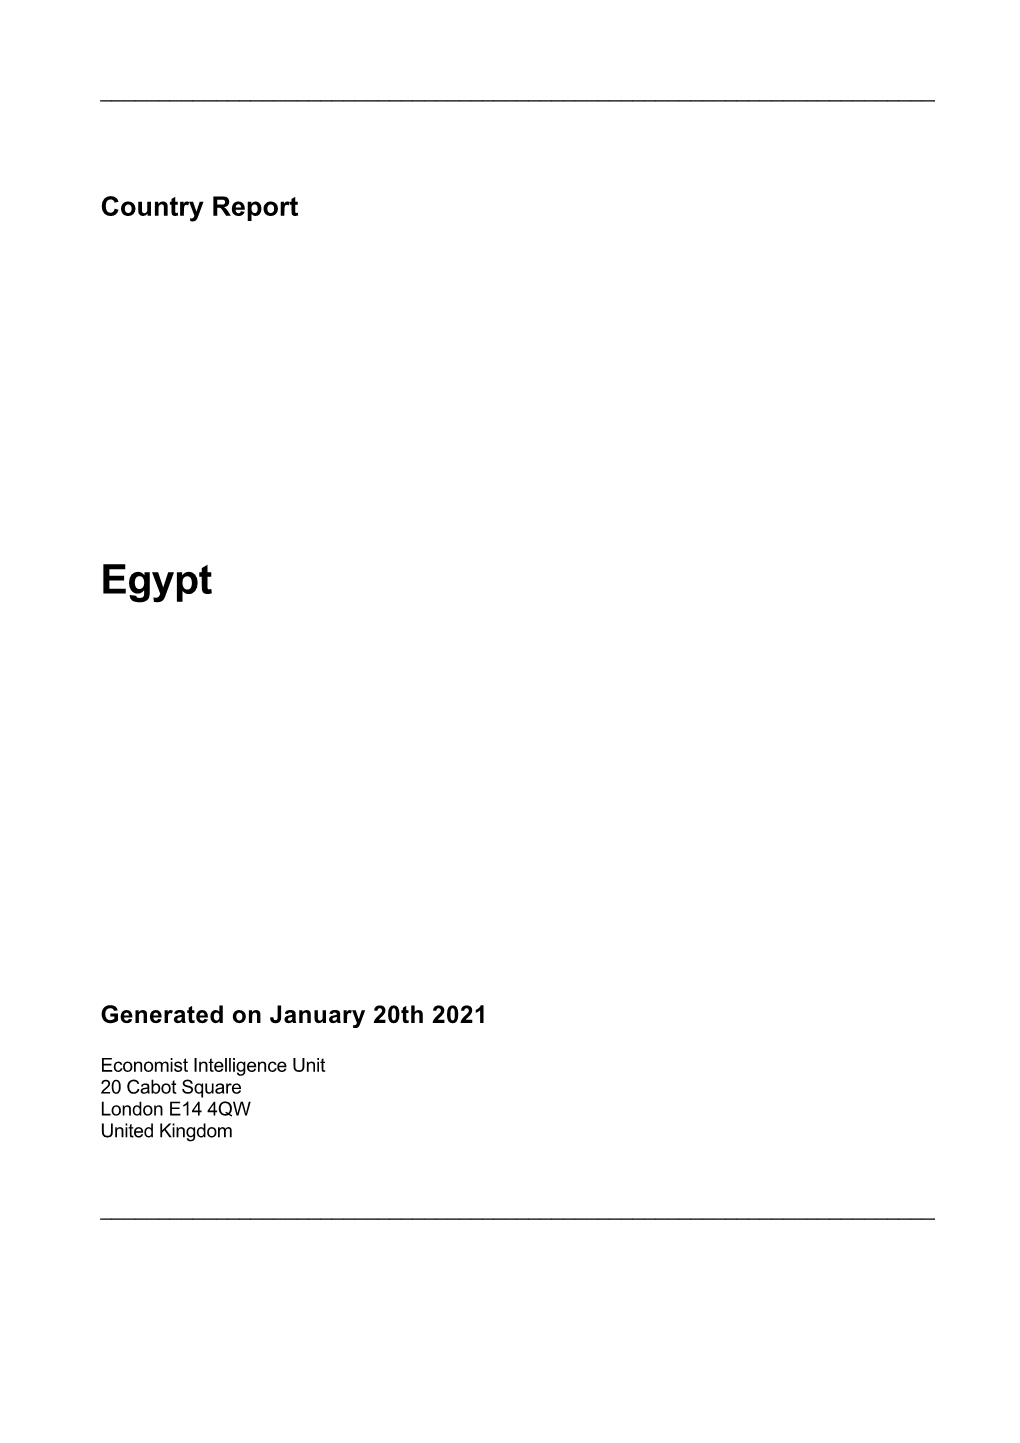 Country Report Egypt January 2021